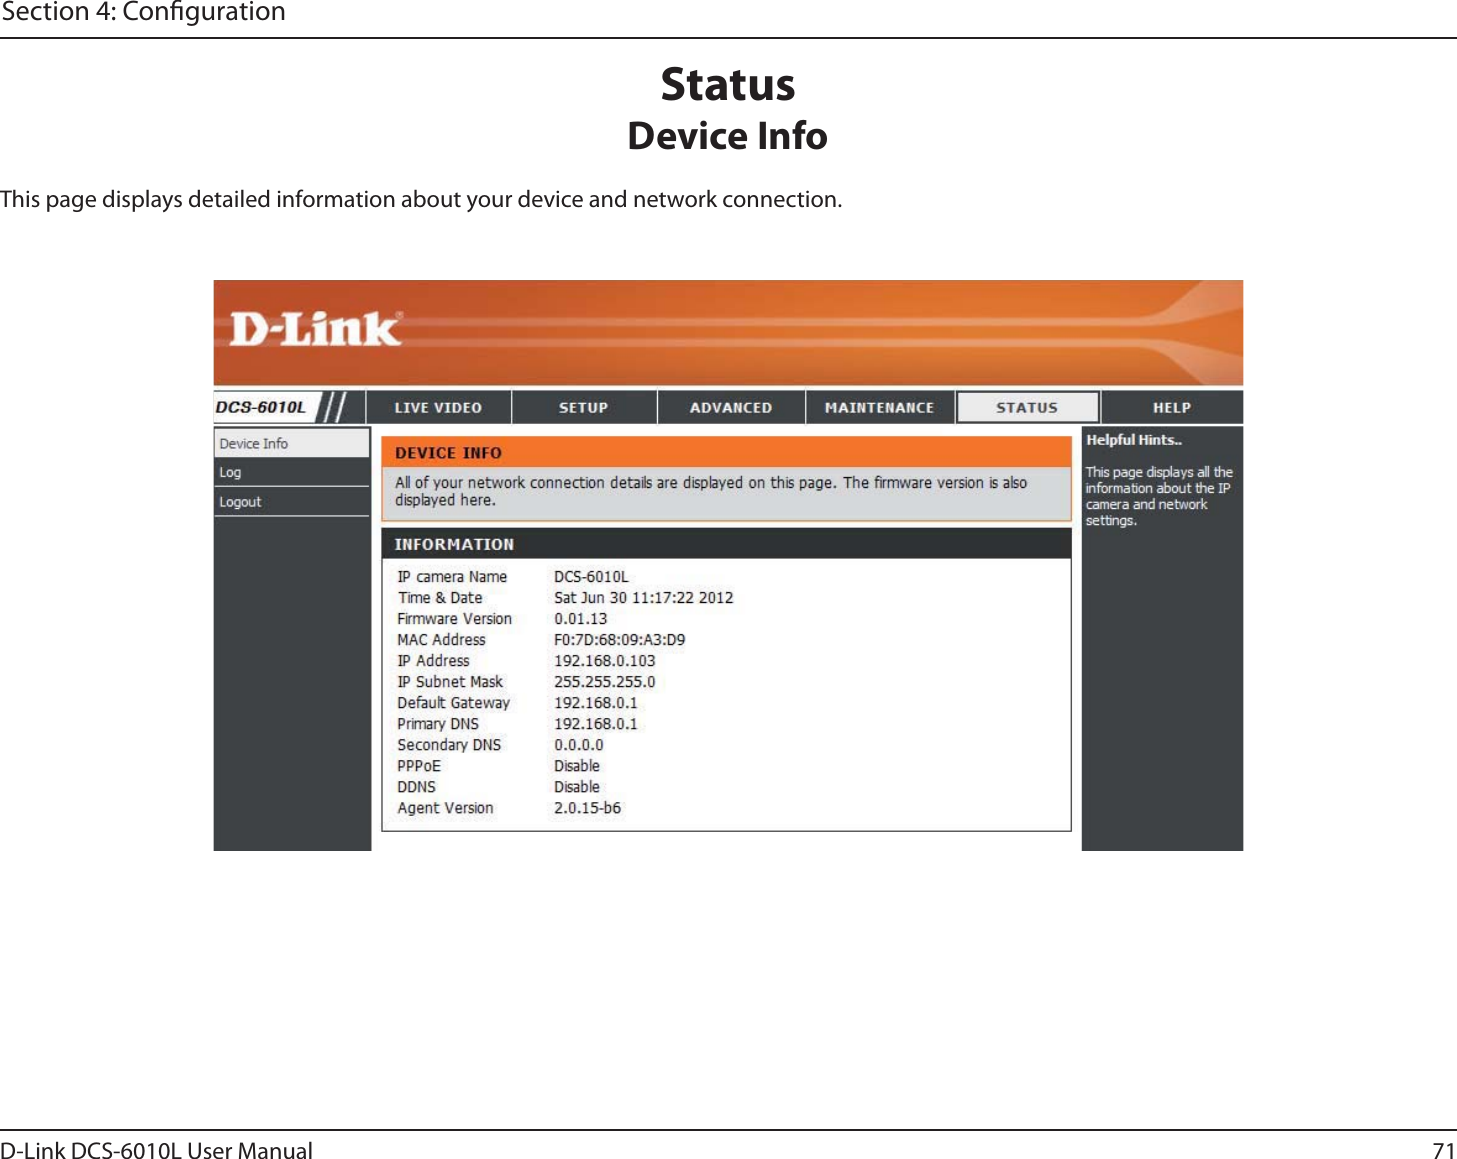 71D-Link DCS-6010L User ManualSection 4: CongurationStatusDevice InfoThis page displays detailed information about your device and network connection.